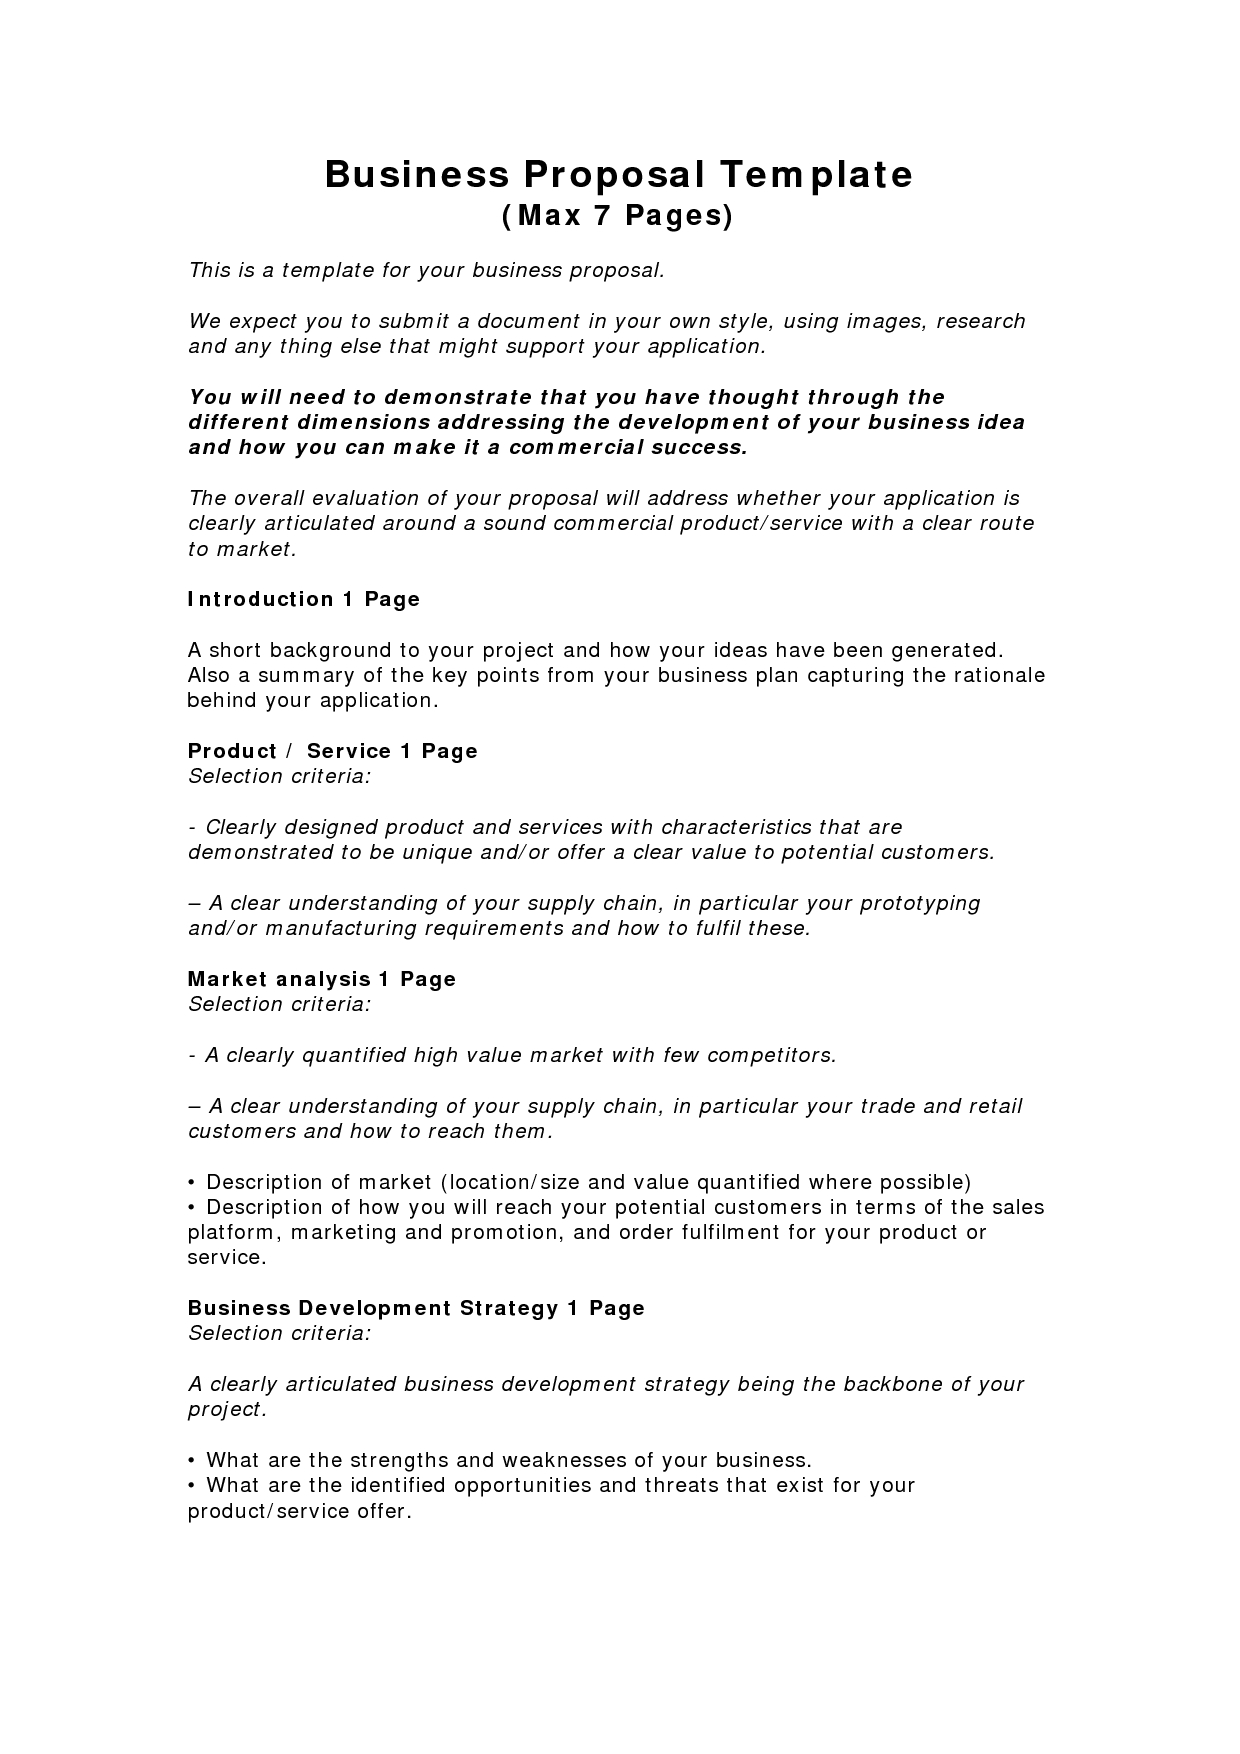 Business Proposal Letter Template Free Download - Business Proposal Templates Examples